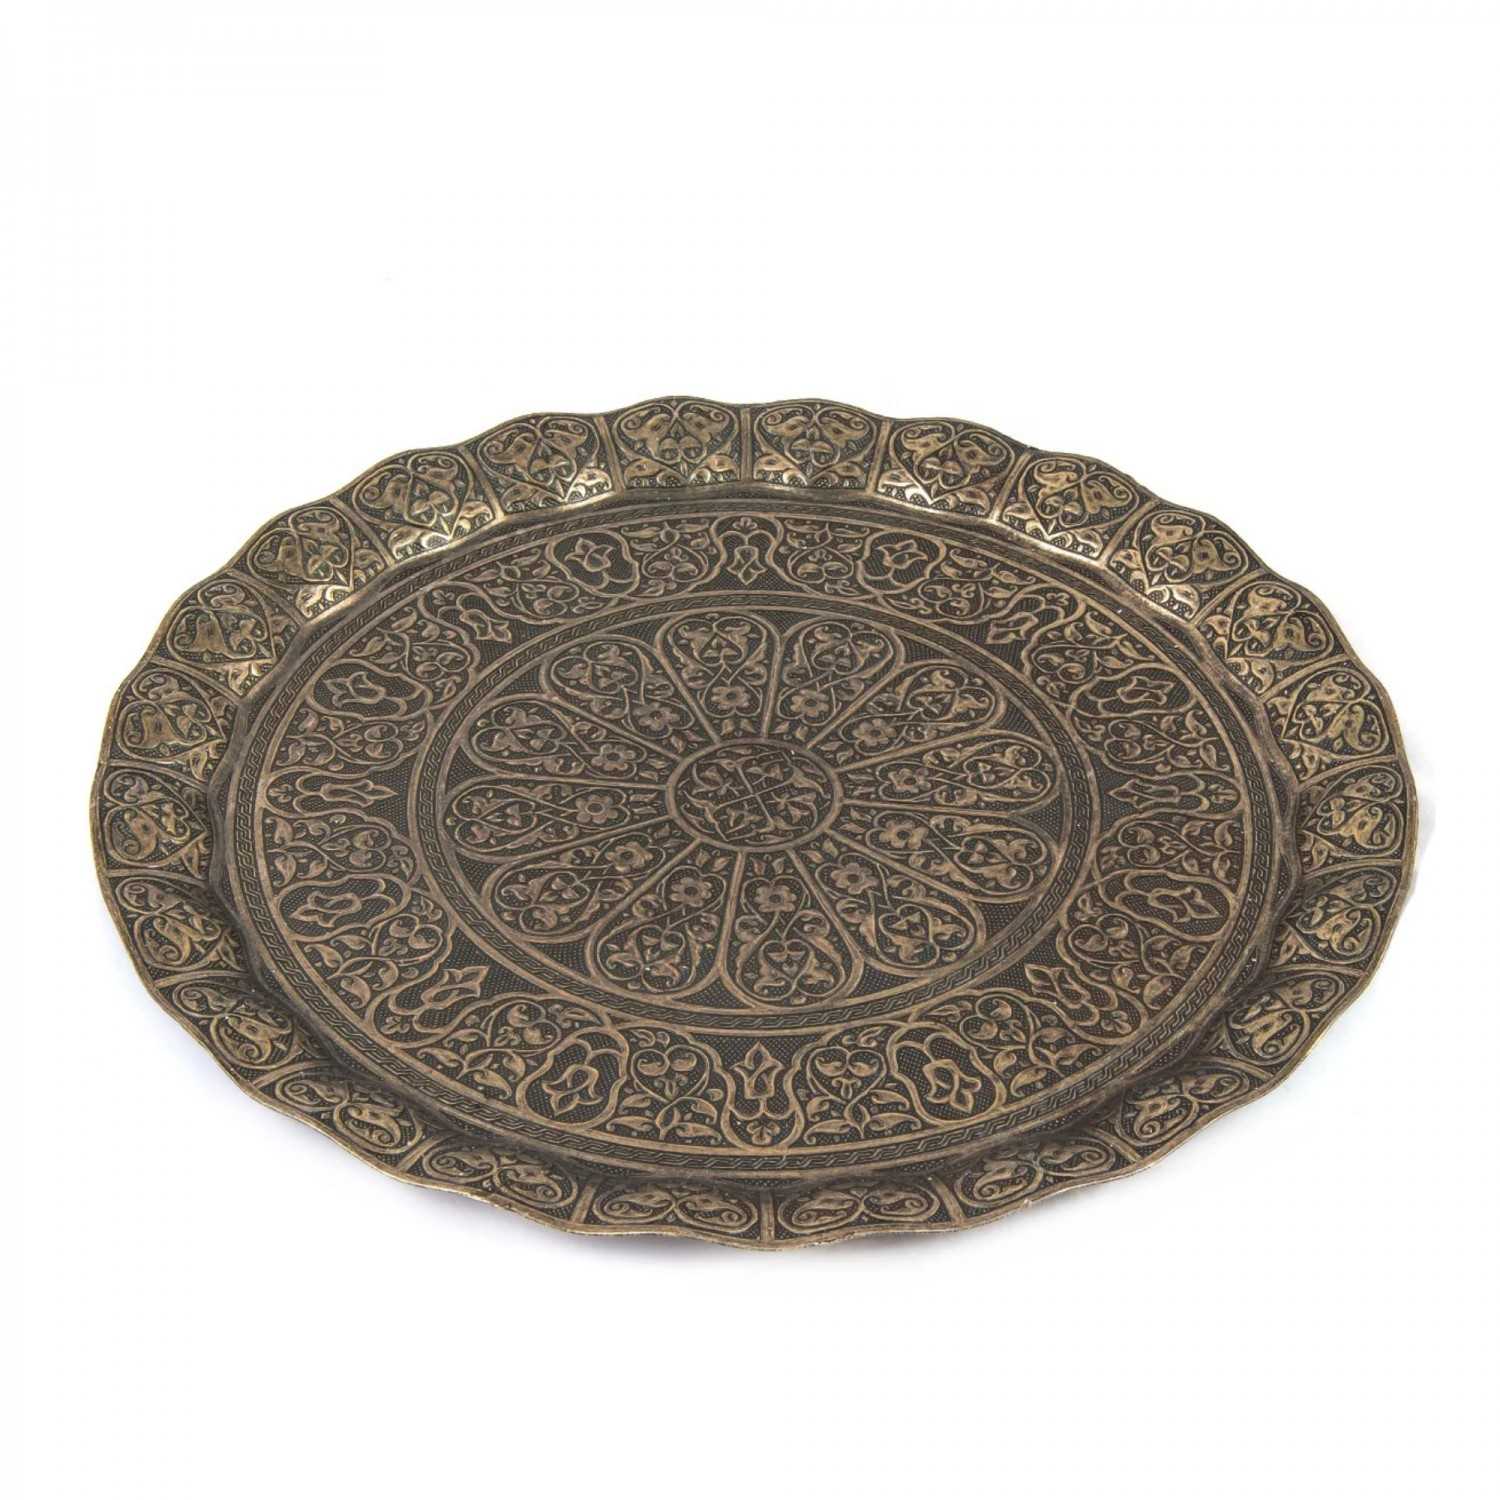 Middle Eastern Style Decorative Round Serving Tray